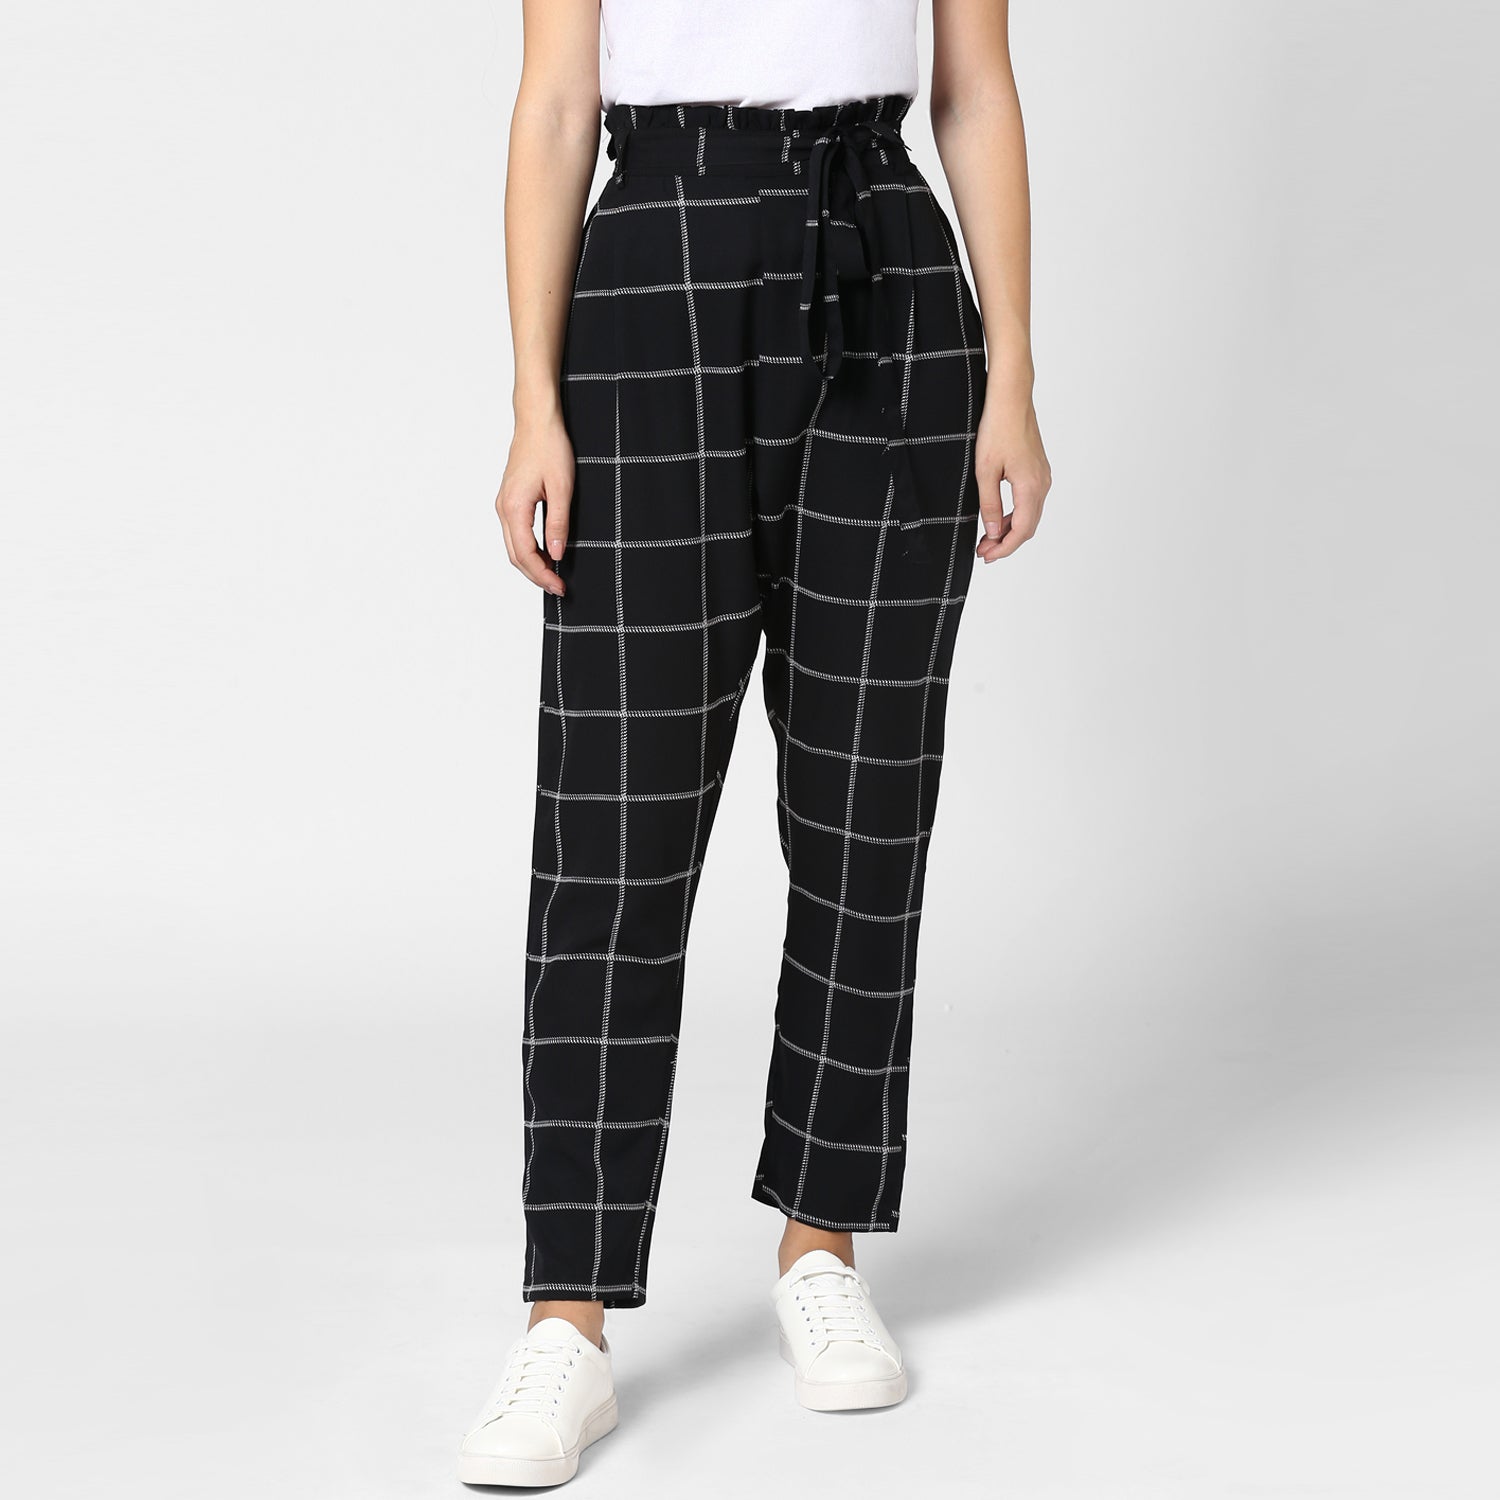 Women's Black and White Check Paperbag Pants with elasticated waistband - StyleStone